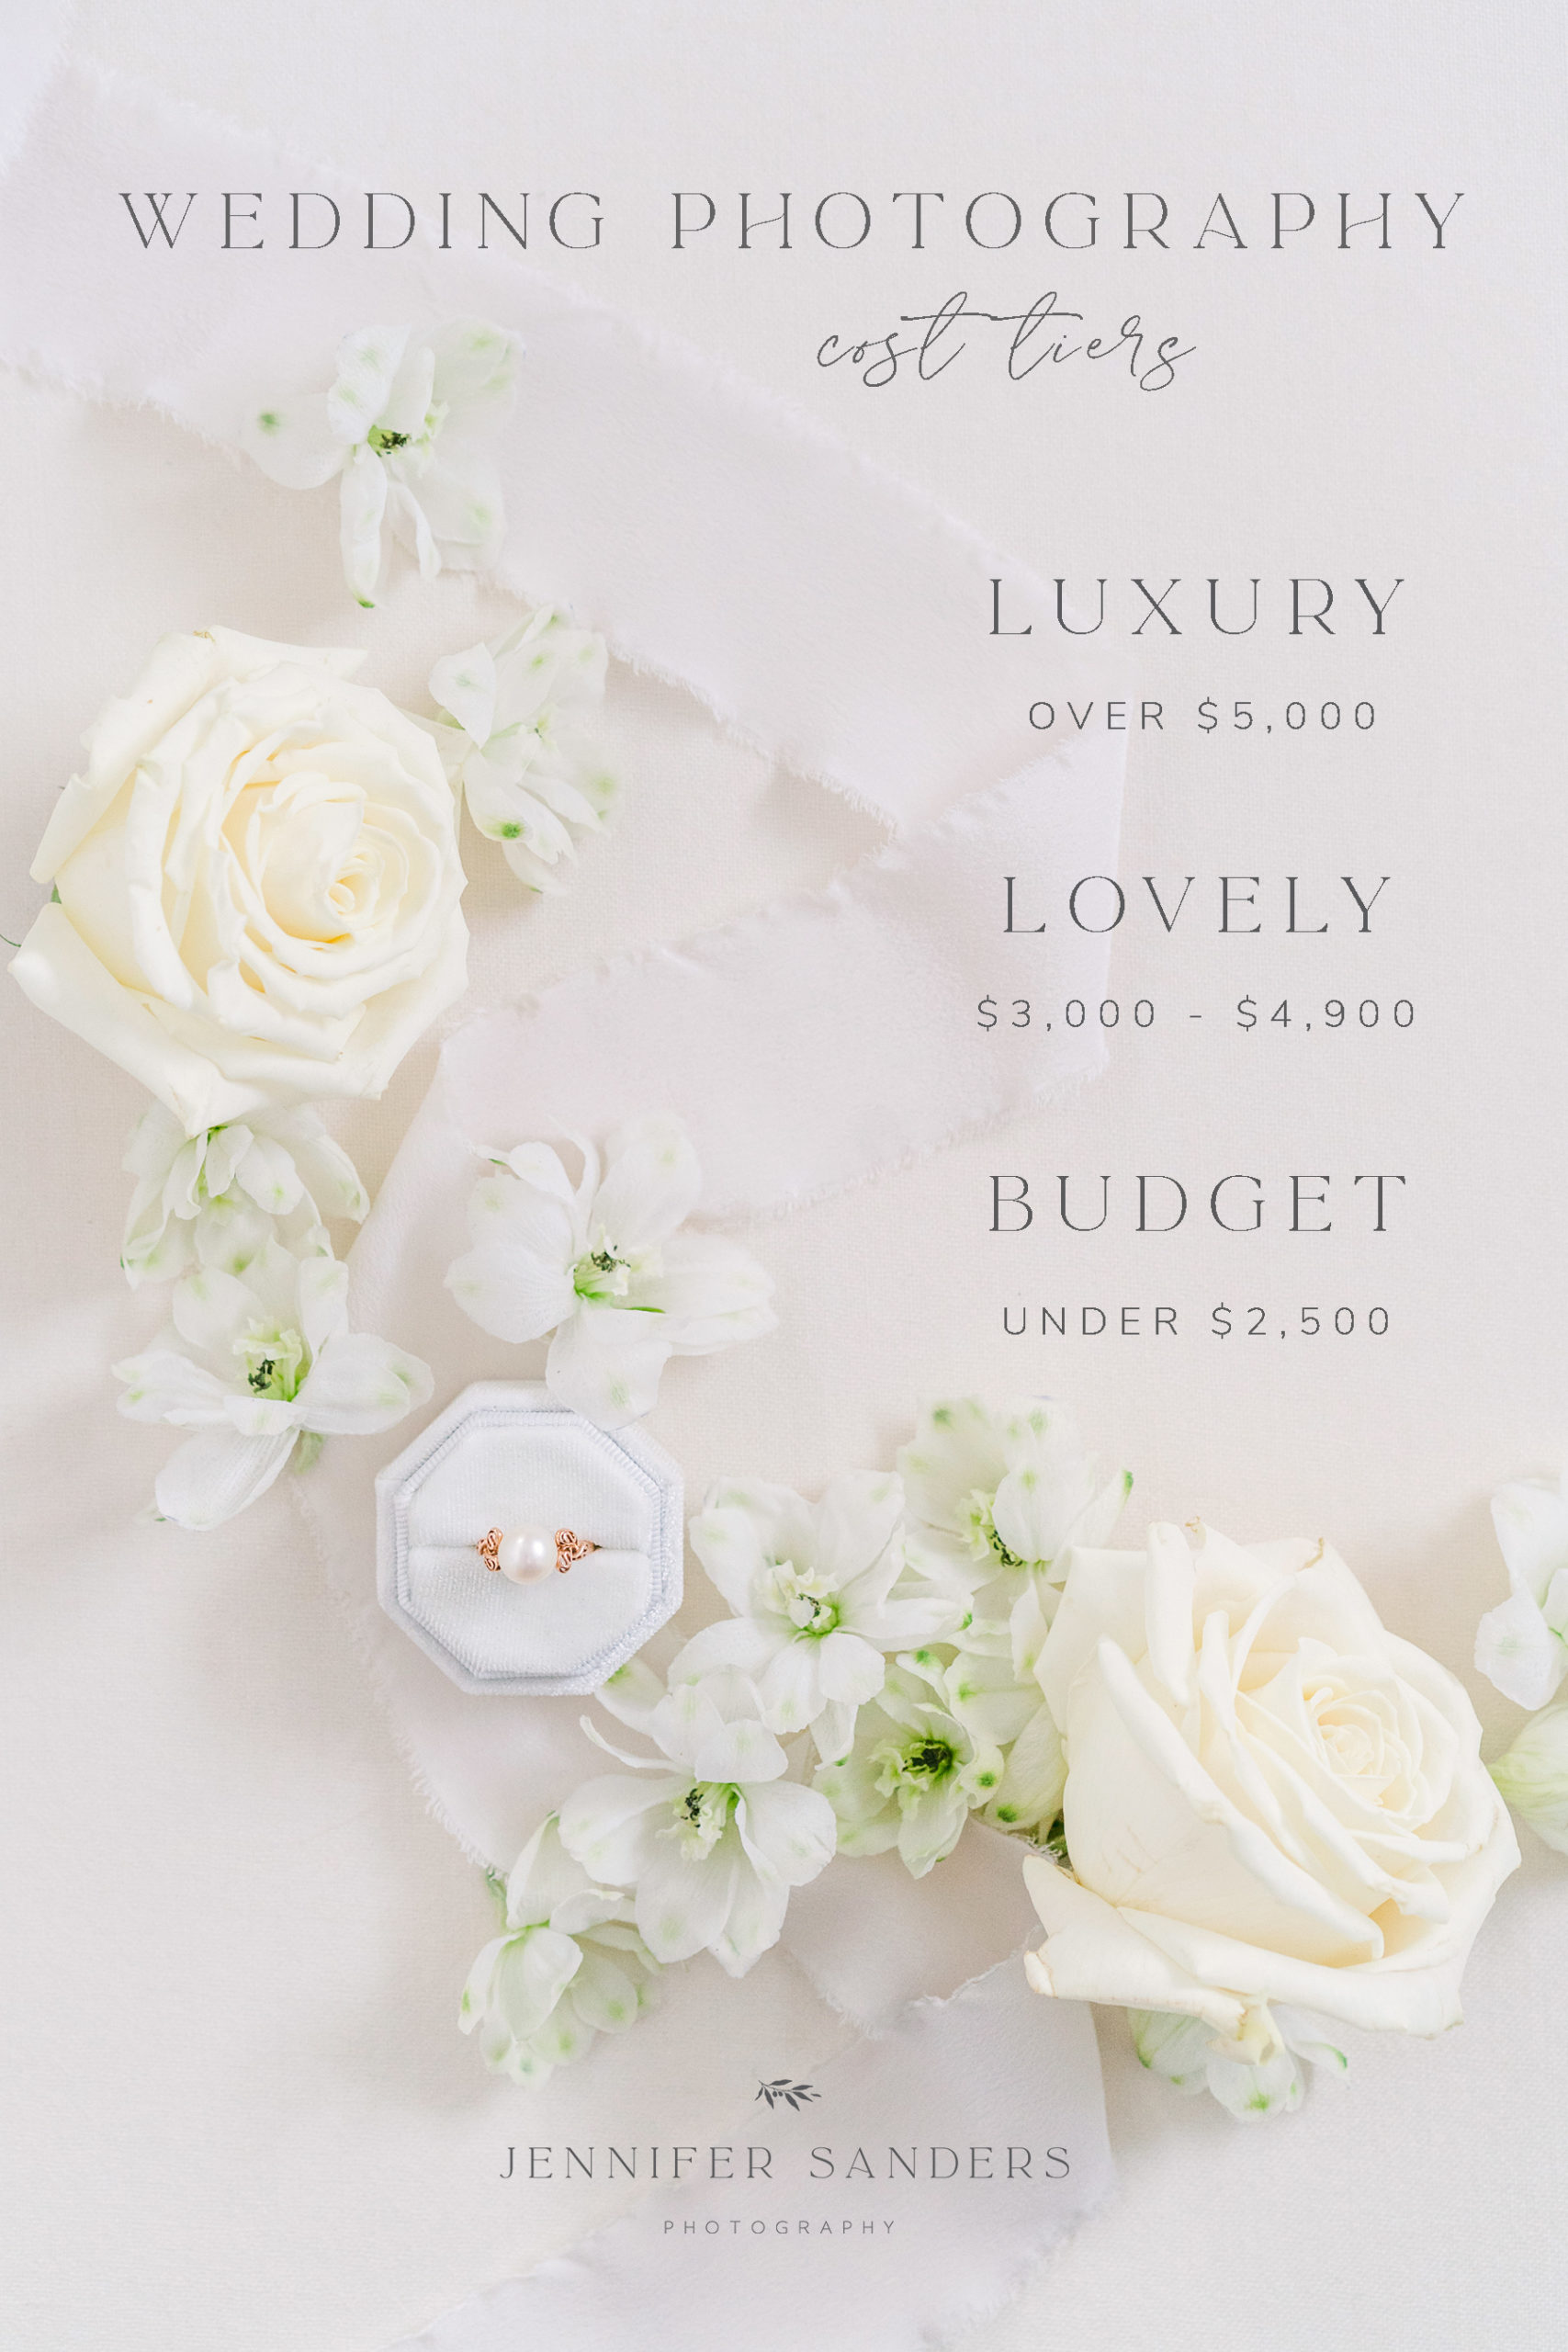 Wedding Photography Cost Tiers Graphic